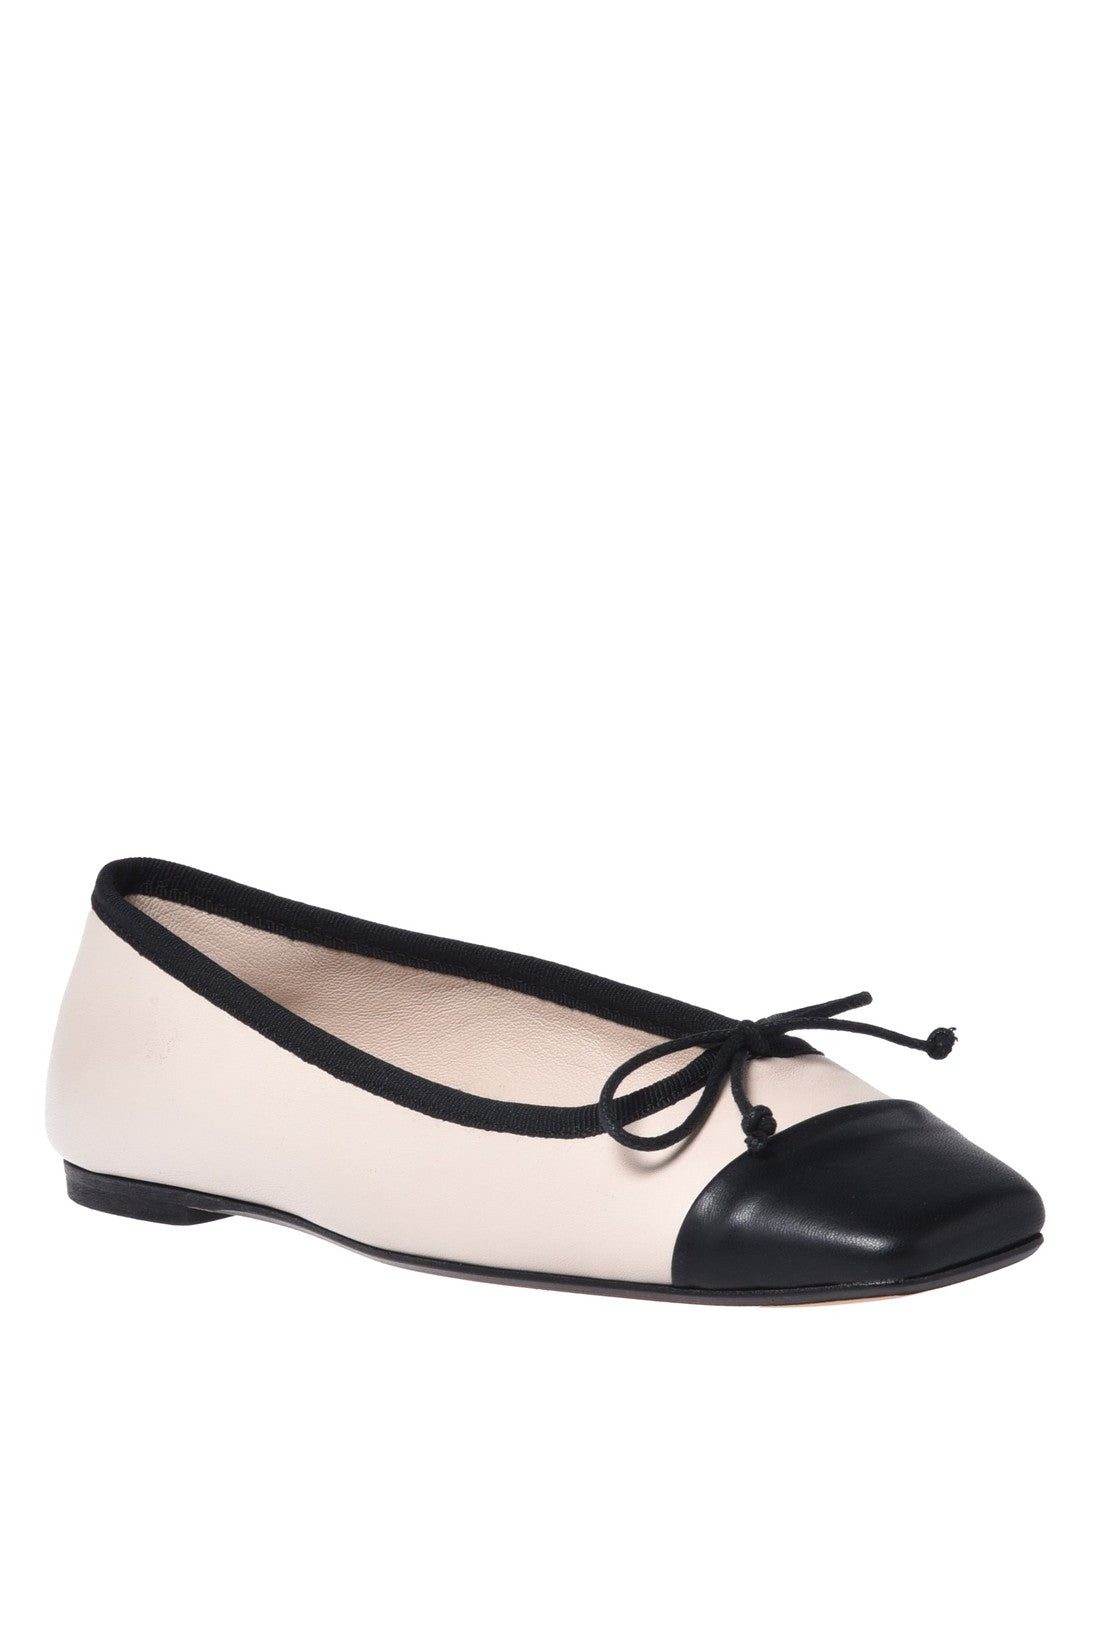 Ballerina pump in black and beige nappa leather